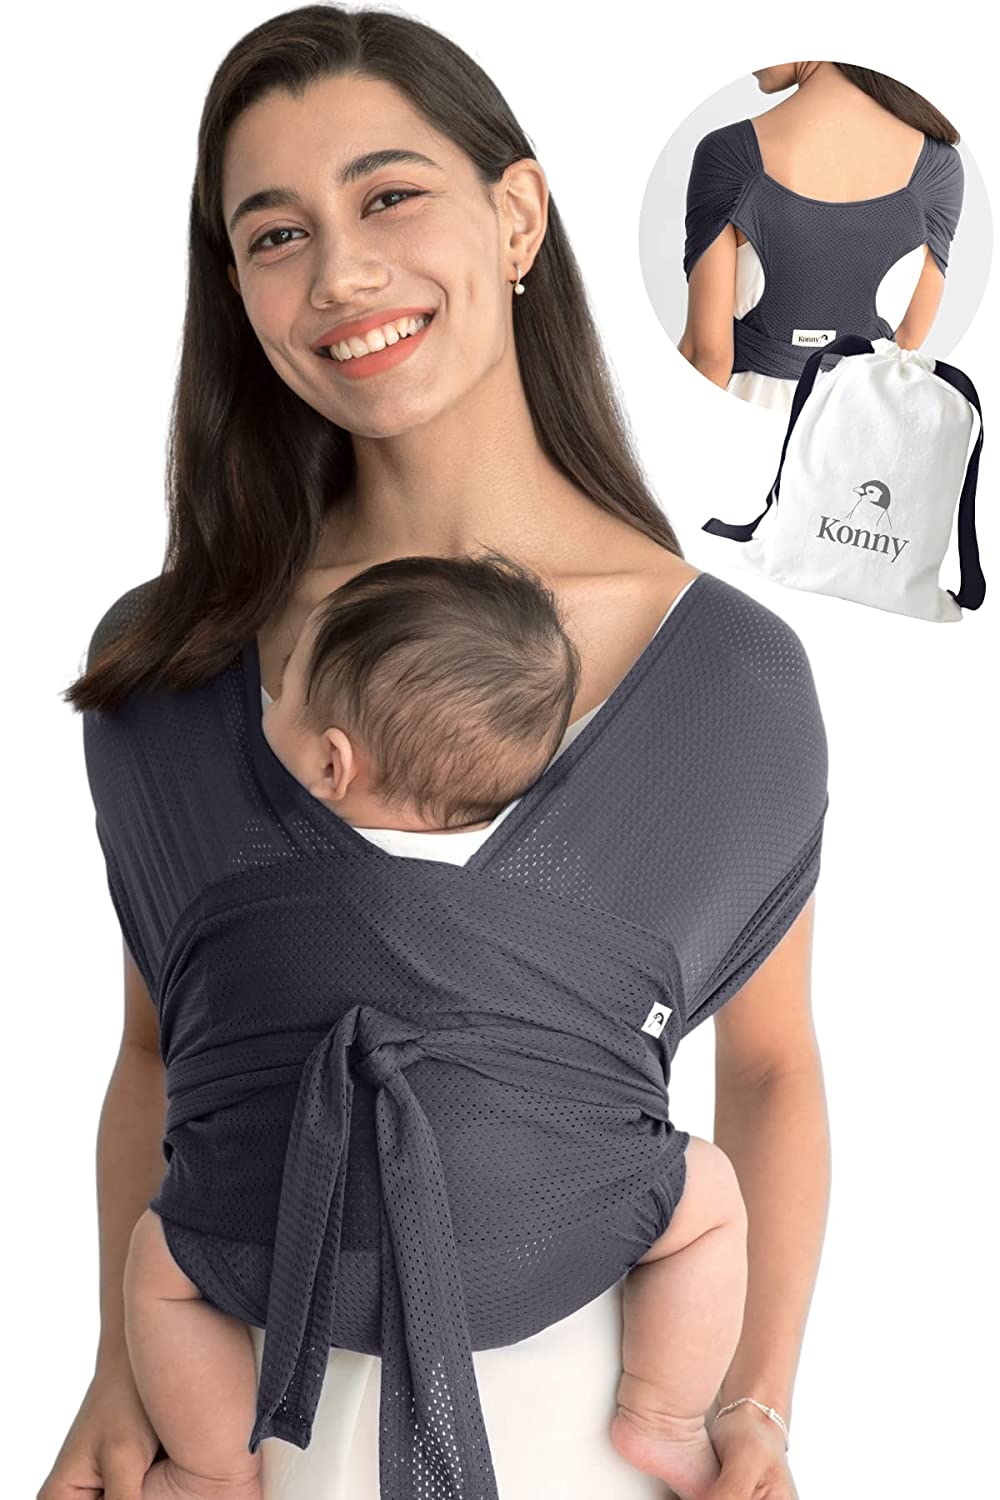 Konny Air Mesh Baby Carrier | Ultra Light, Easy Baby Wrap | Newborns, Infants up to 20 kg Toddlers | Cool and Breathable Fabric | Useful Sleep Solution (Anthracite, L)